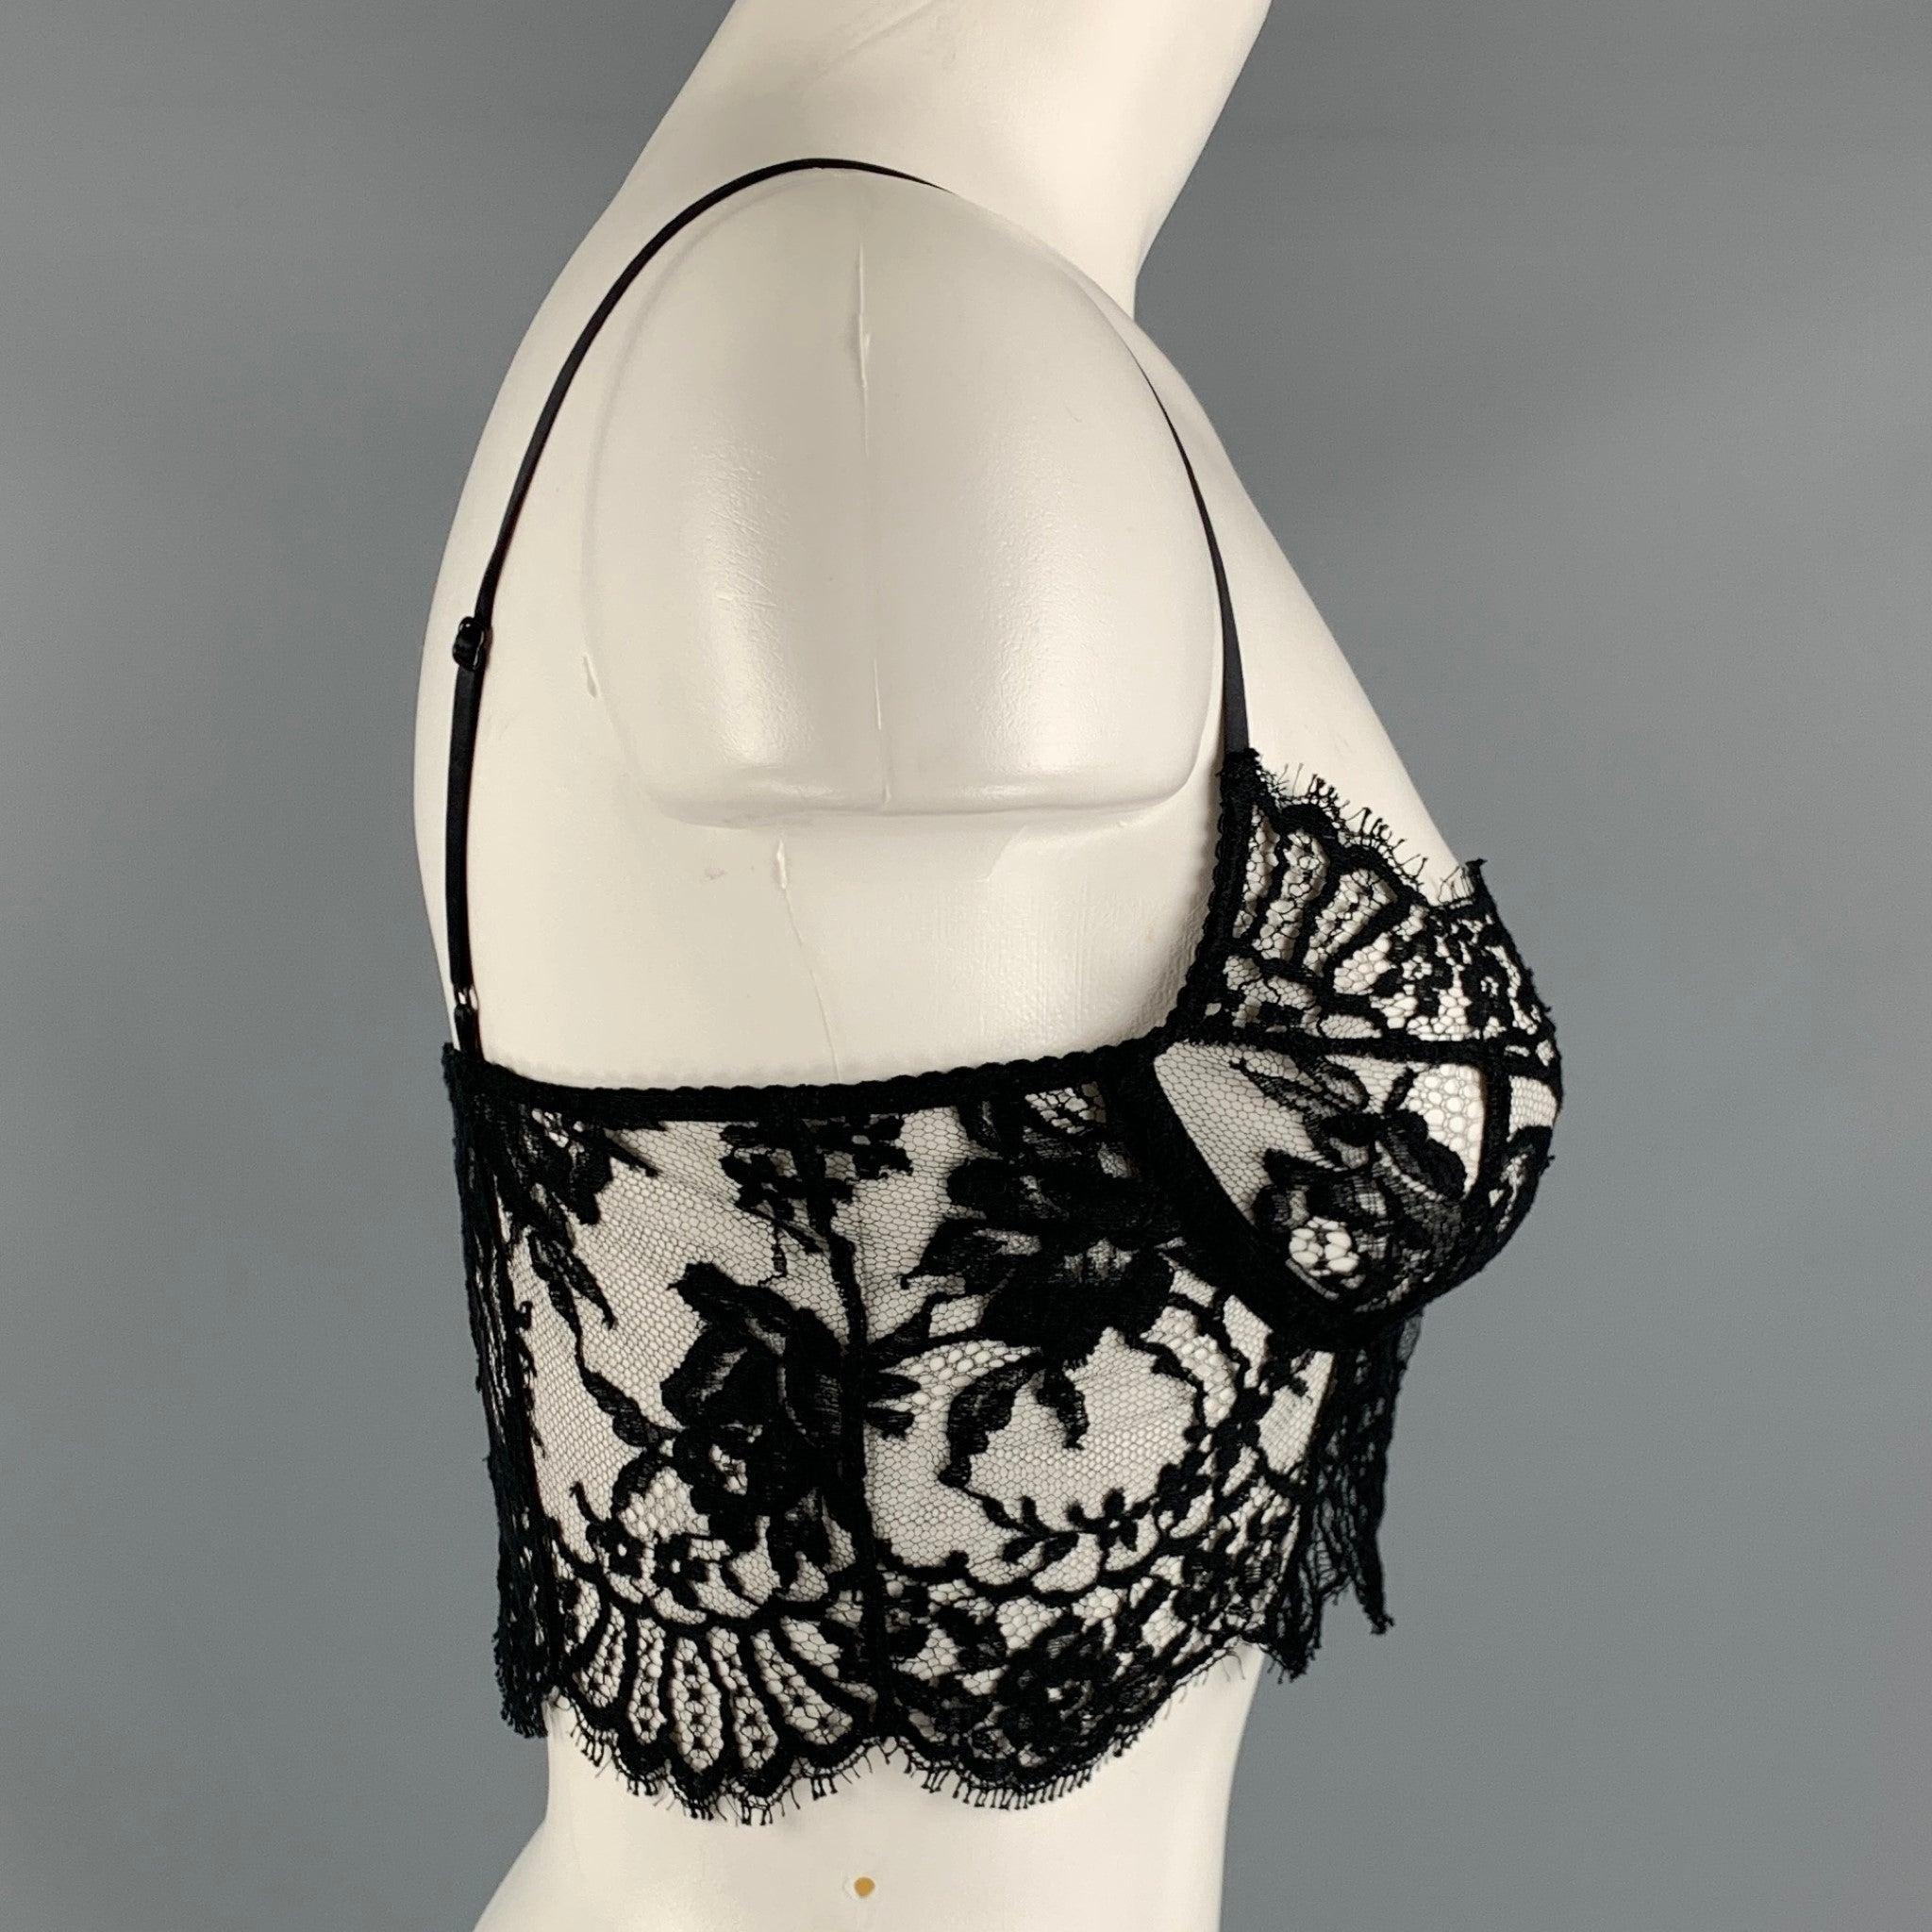 DOLCE & GABBANA bralette casual top comes in a black lace cotton featuring a hook & eye closure. Made in Italy.Excellent Pre-Owned Condition. 

Marked:   38 

Measurements: 
  Bust: 29 inches Length: 5 inches  
  
  
 
Reference: 127338
Category: